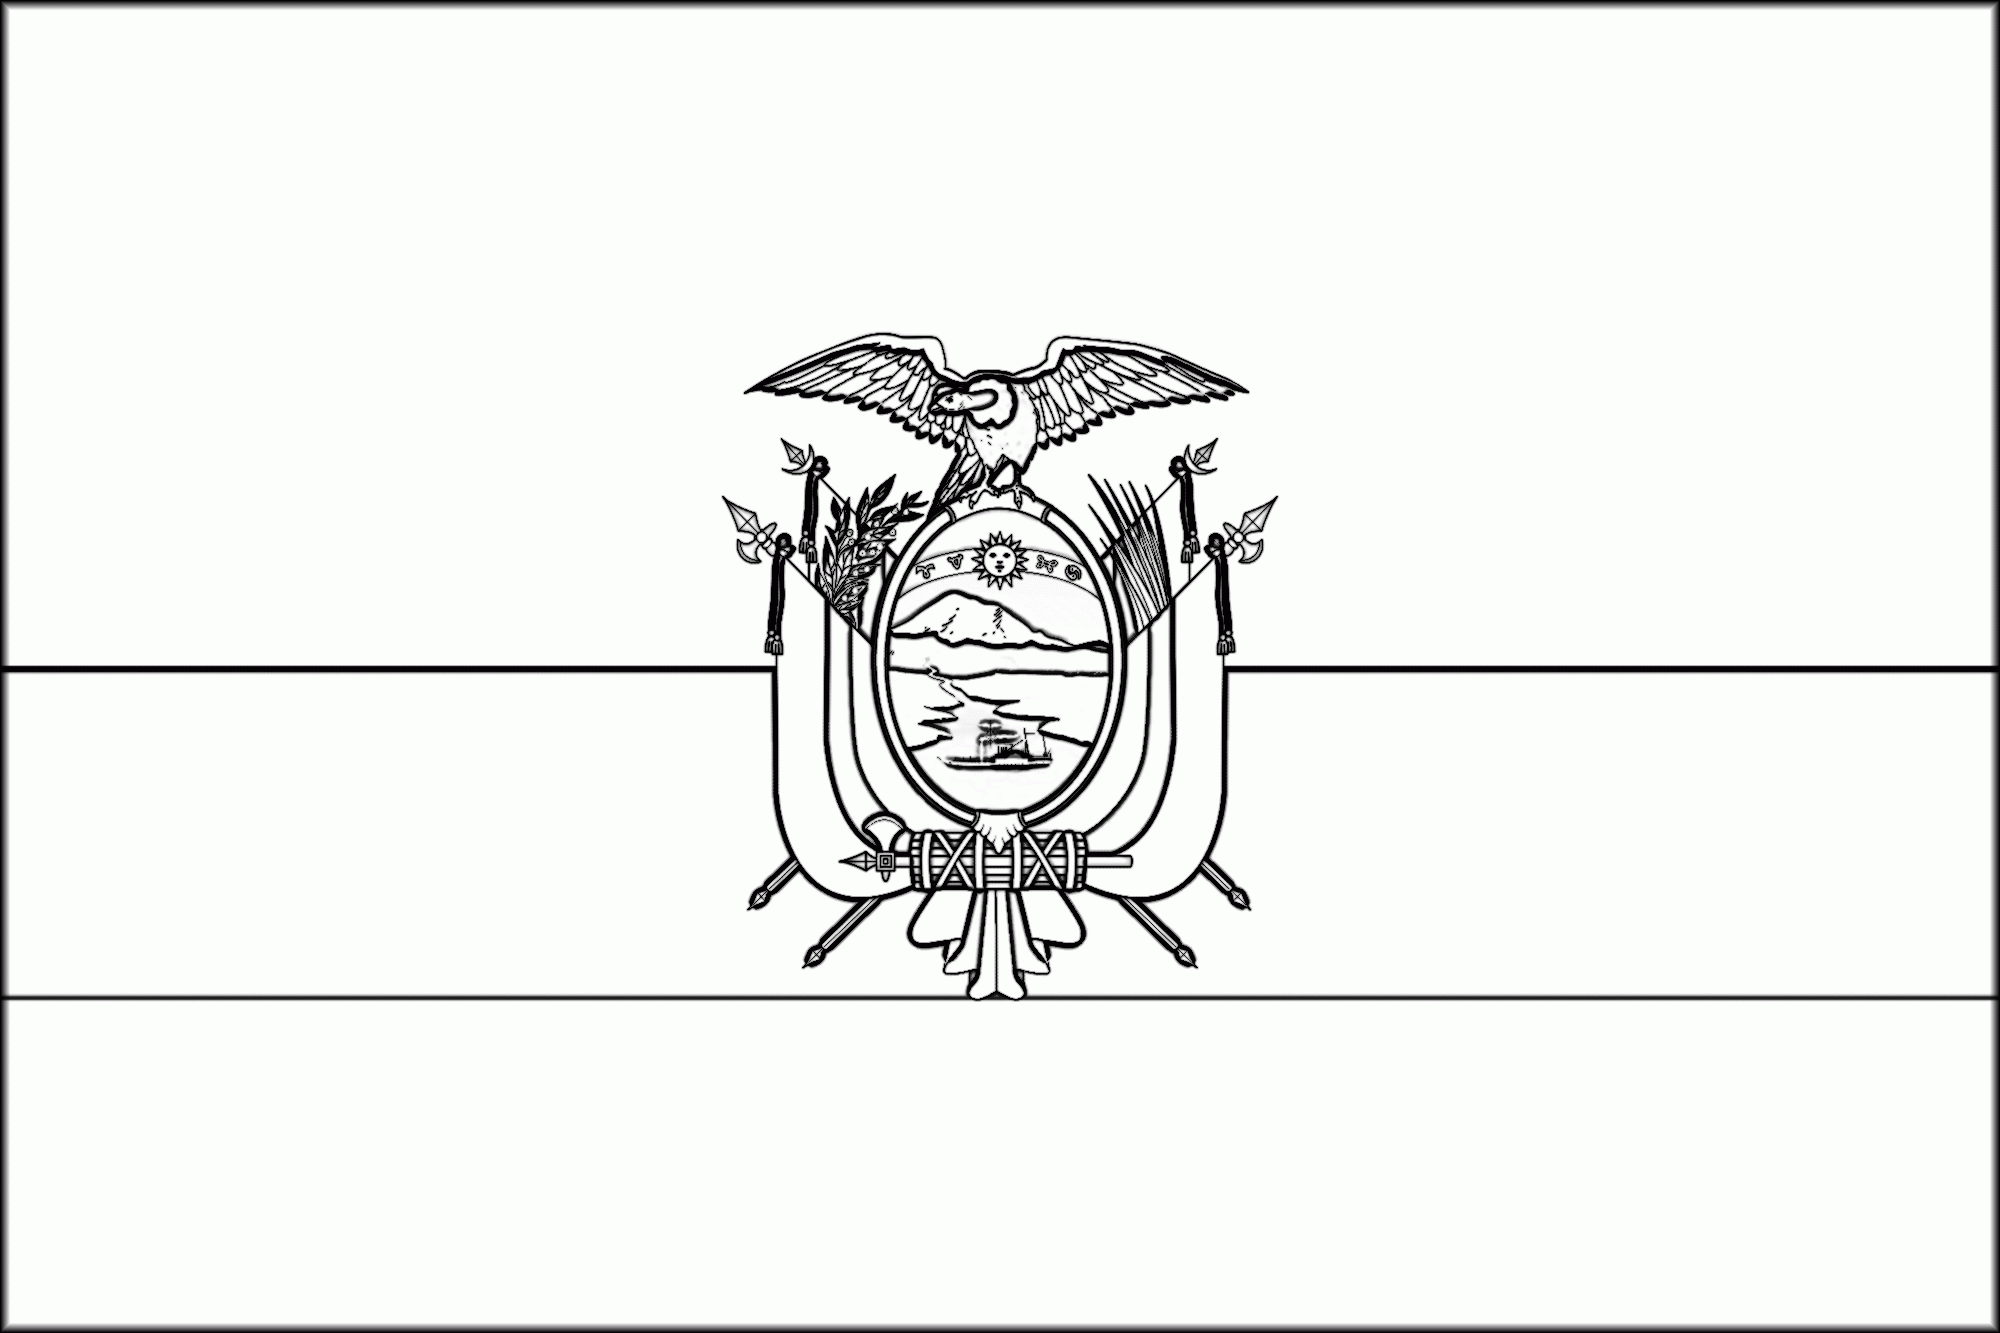 Download Or Print This Amazing Coloring Page Ecuador Flag Coloring Page Ecuador Flag Flag Coloring Pages Coloring Pages